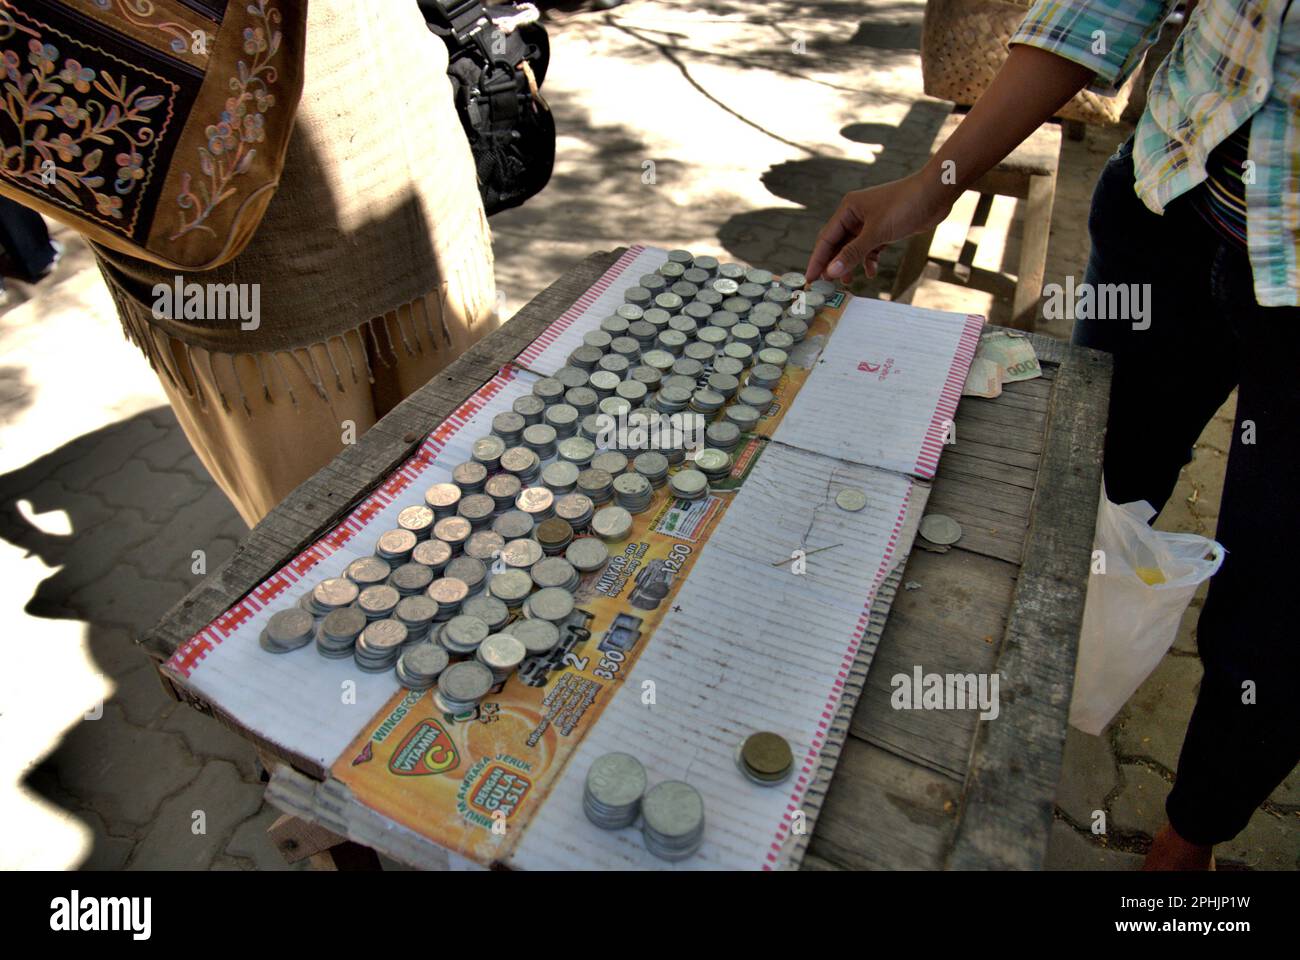 A vendor of coins—a common offering in pilgrimage activity according to local tradition—at the complex of the Great Mosque of Banten, a cultural heritage from Banten Sultanate period located in an area now called Banten Lama (Old Banten) in Serang, Banten, Indonesia, on this photo taken in 2010. 'The sustainability of cultural heritage is strongly linked to the effective participation of local communities in the conservation and management of these resources,' according to a team of scientists led by Sunday Oladipo Oladeji in their research article published on Sage Journals in October 2022. Stock Photo